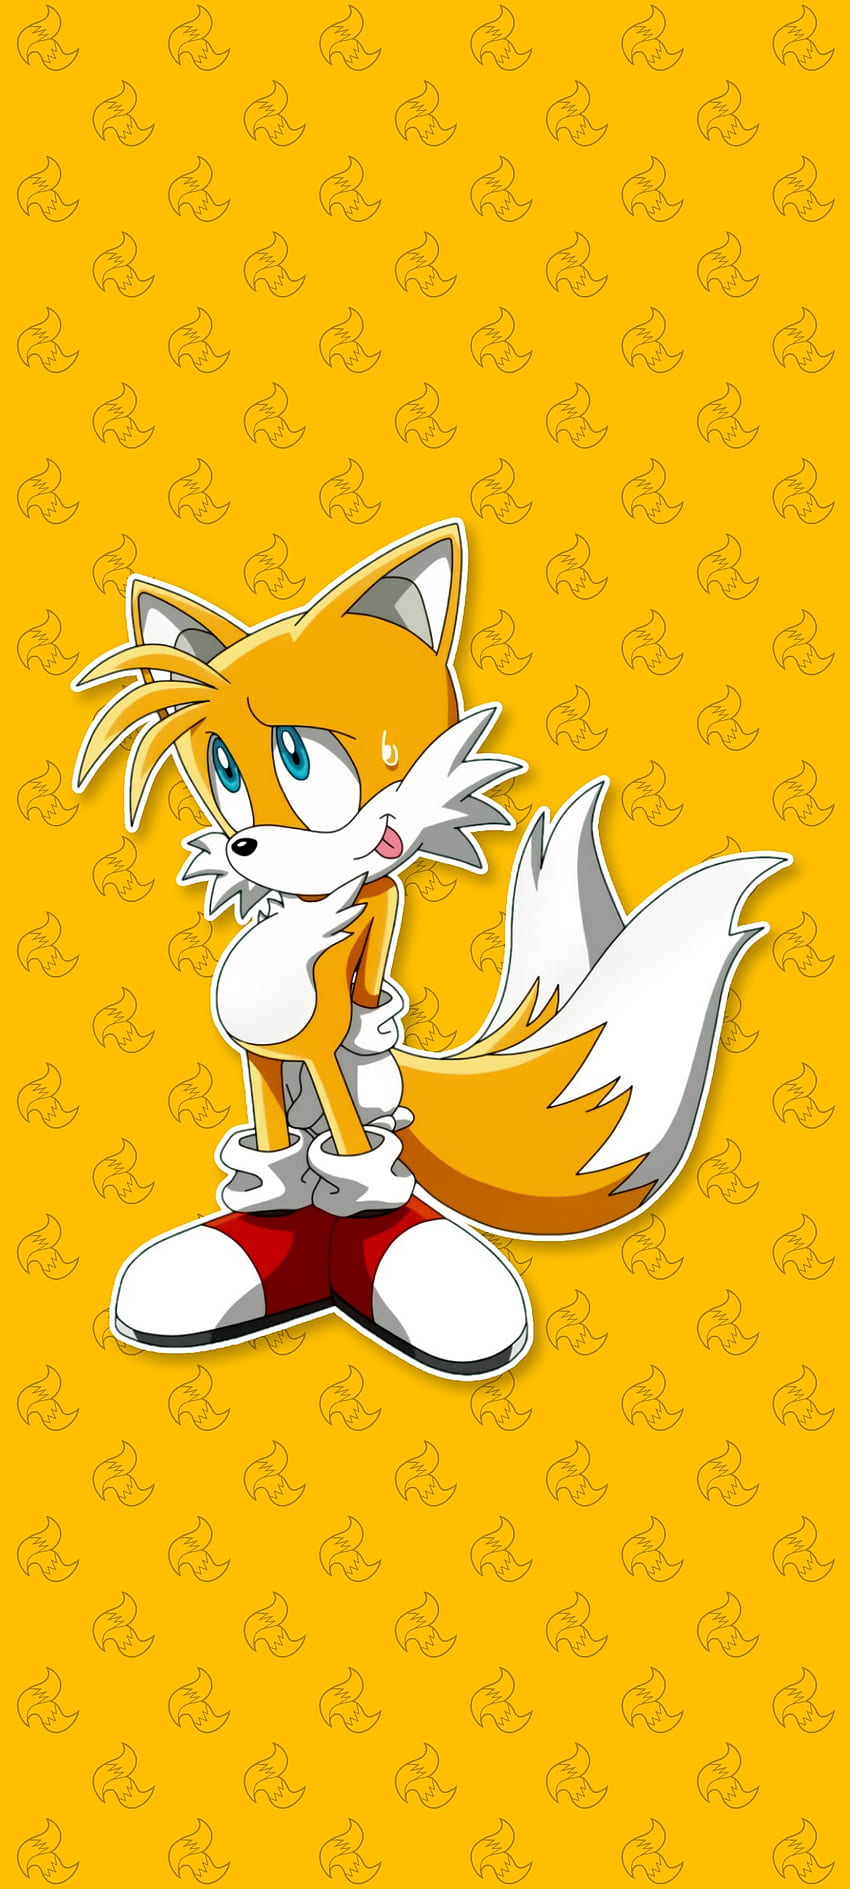 Tails Sonic X WallP, sonic the hedgehog, miles tails prower, tails the fox, tails sonic HD phone wallpaper